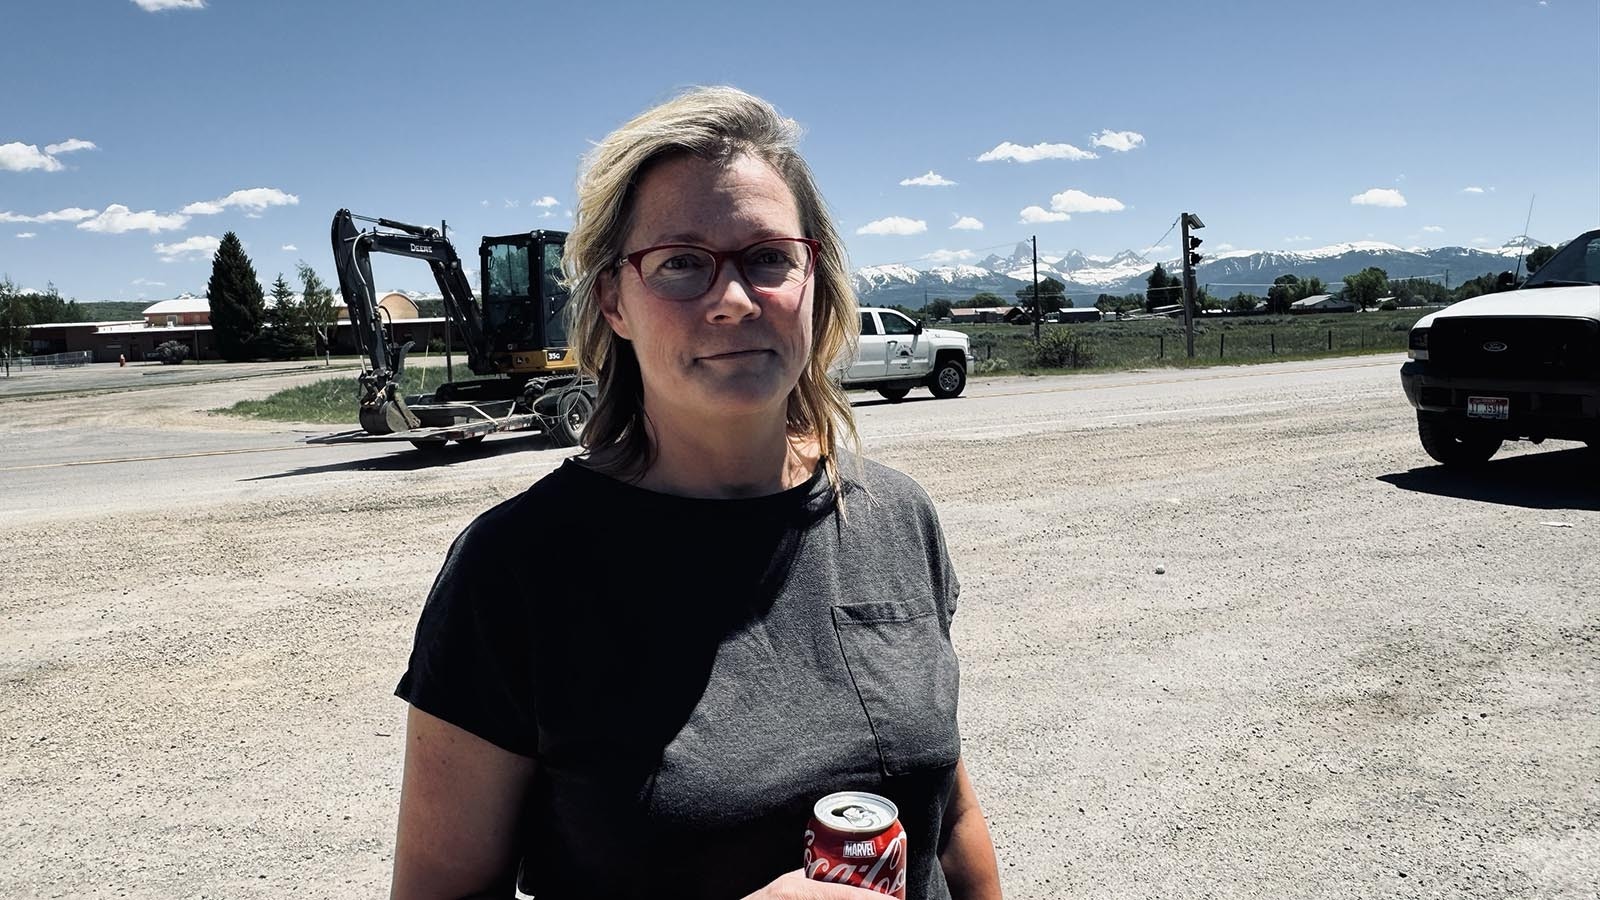 Jesse Fritsch, co-owner of Elements Building Specialties in Driggs, said she’s pushing a lot of work off because of the road being out to Jackson. “We’re definitely rescheduling things because of the landslide,” she said. “It’s added to our overall costs because we have to travel around the loop to get to Jackson.”